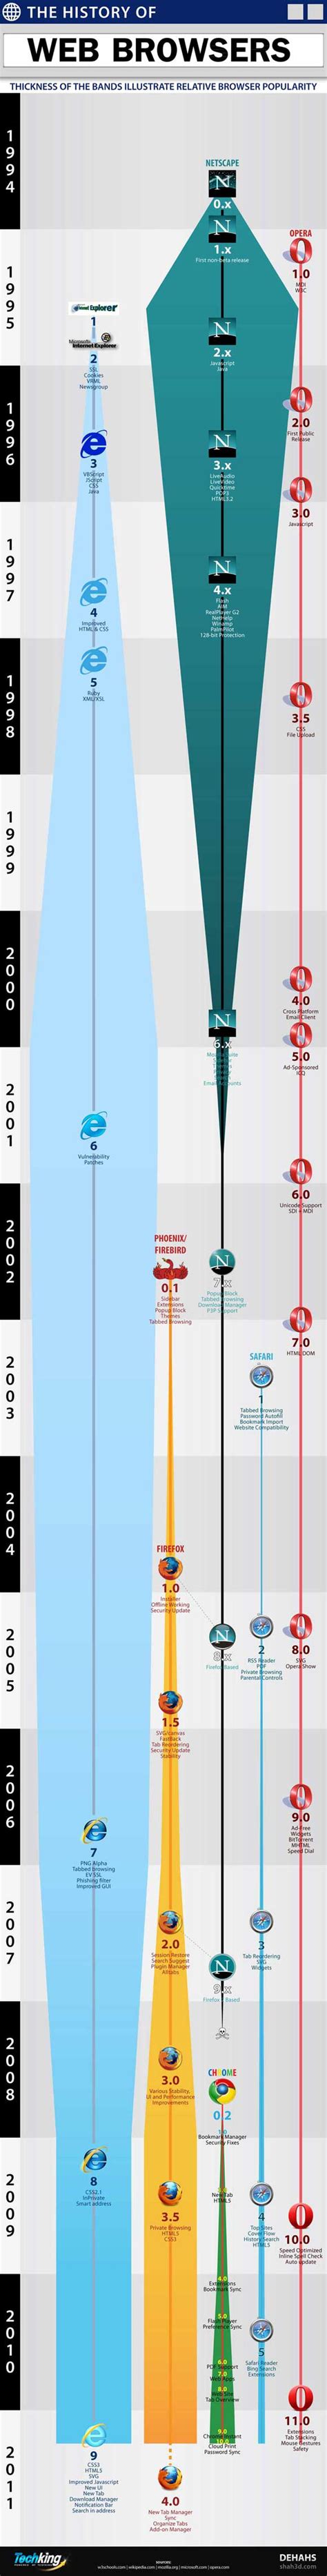 Netscape had a pretty meteoric rise to the top of the web world. Browser Evolution - The History of Web Browsers ...